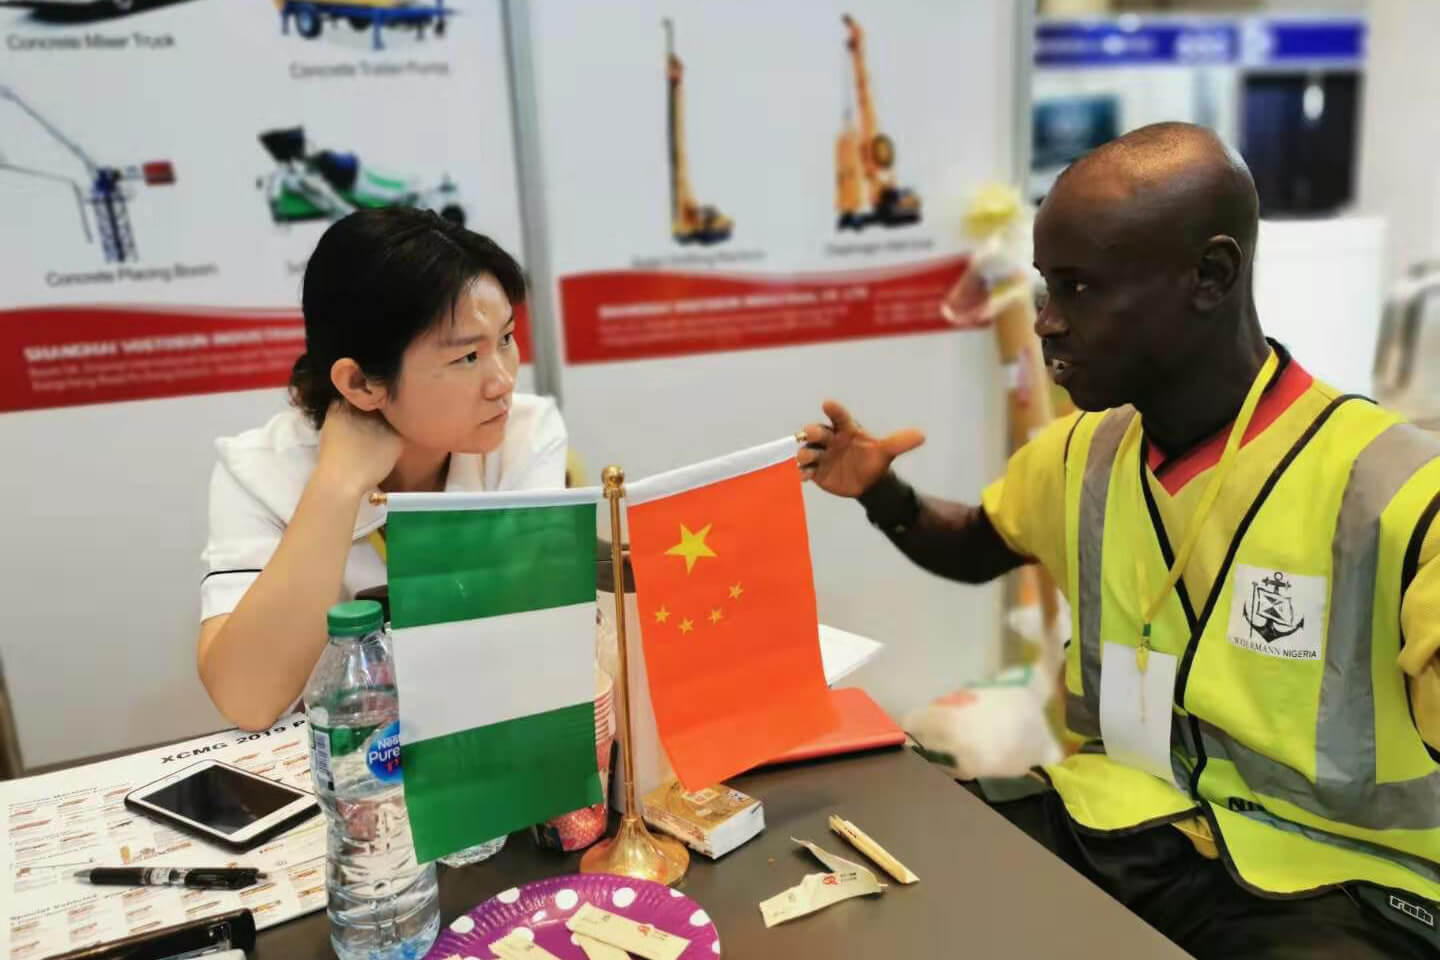 October 29th to 31st, 2019, we participated in the exhibition in Nigeria.